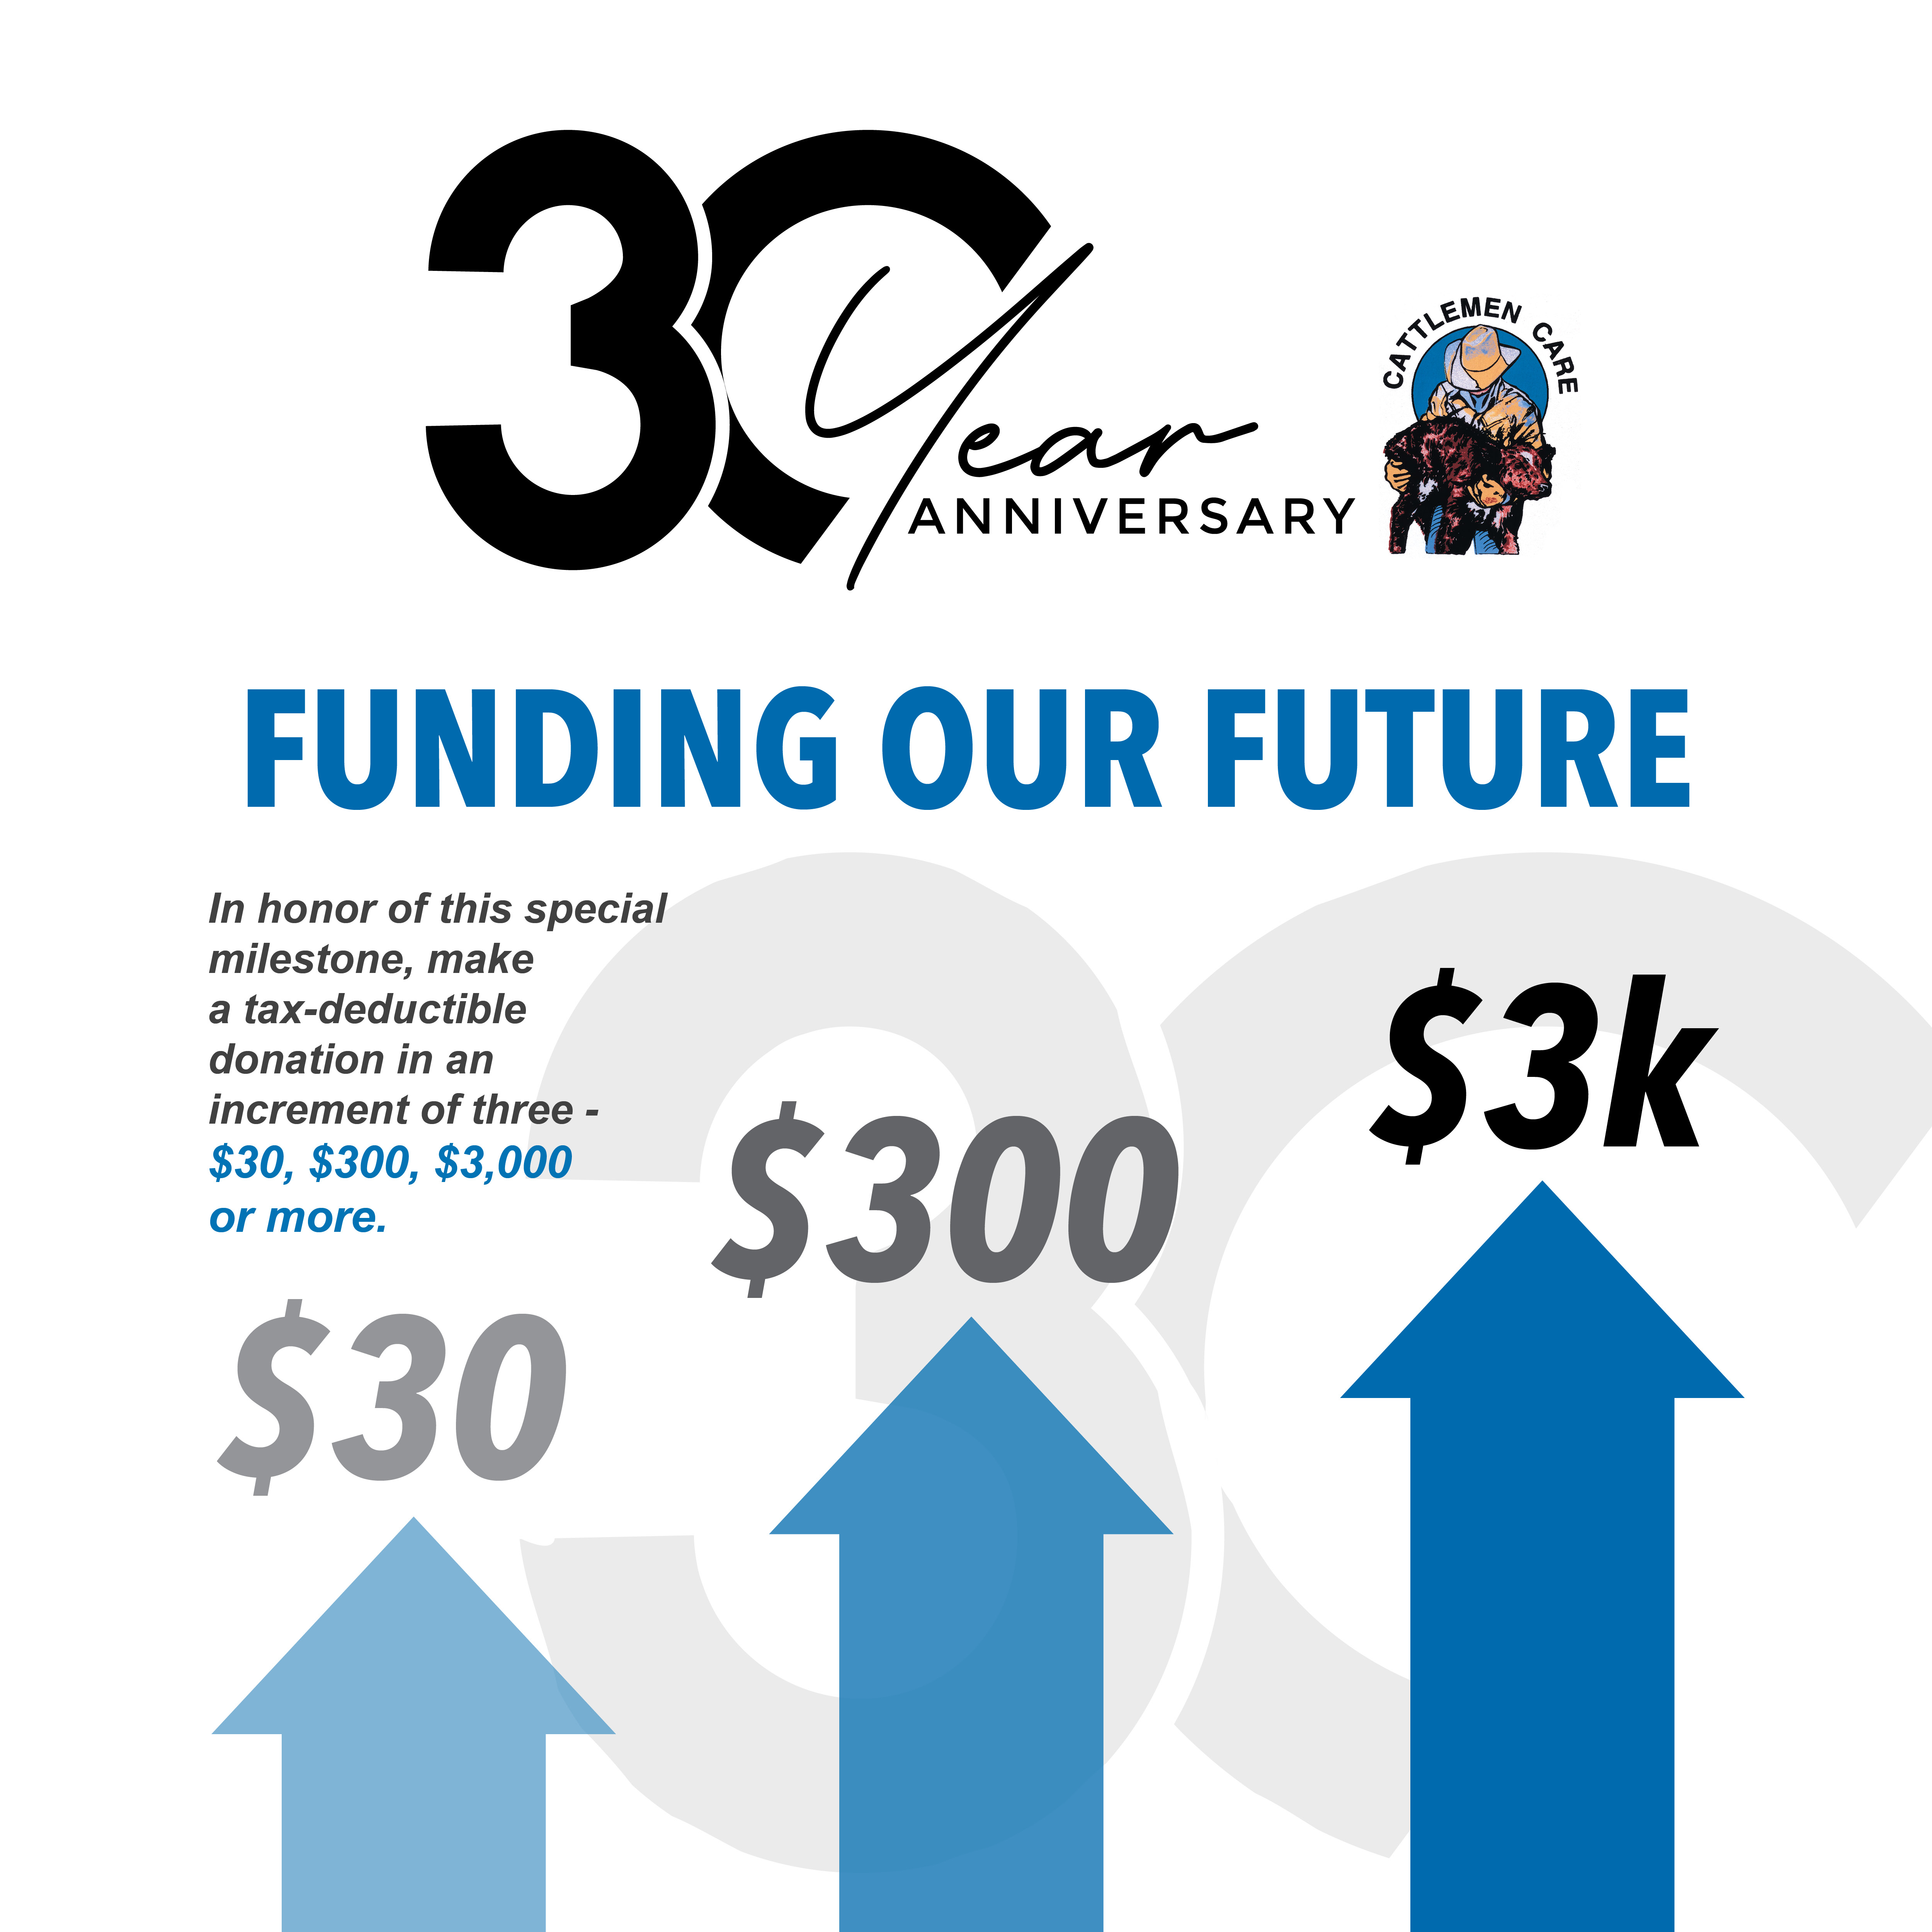 Funding Our Future